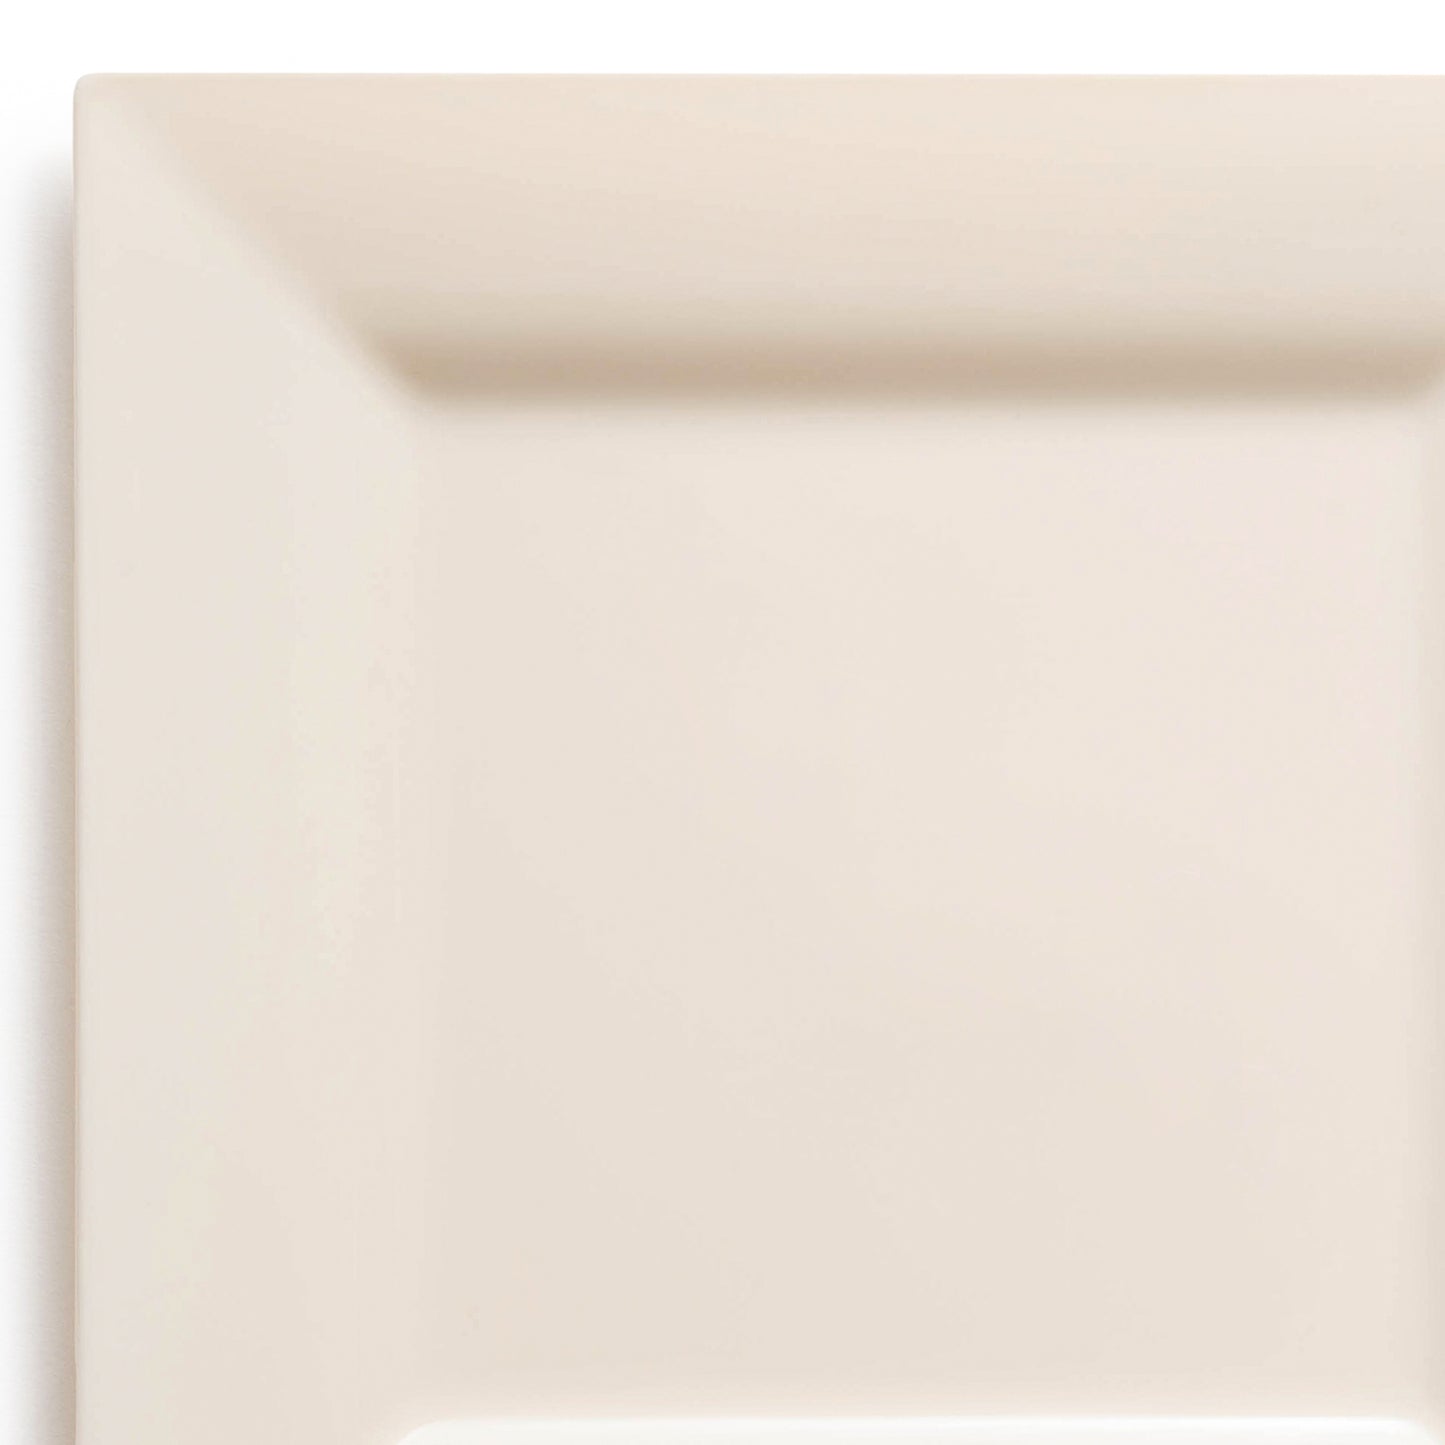 Ivory Square Disposable Plastic Dinner Plates (9.5")